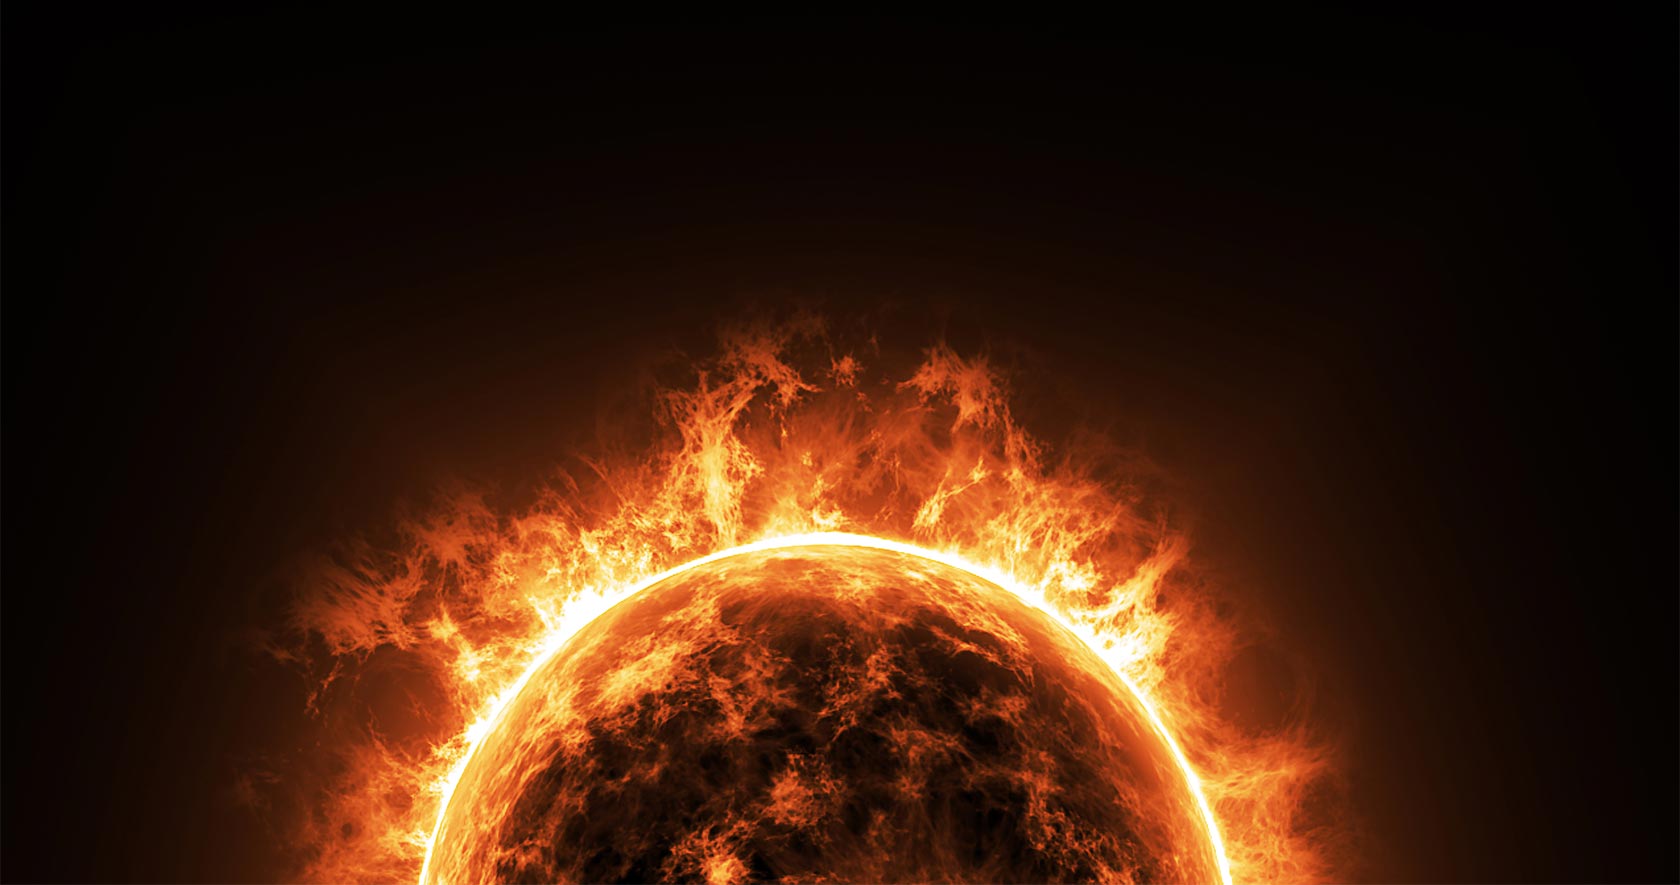 An orange and black sun experiencing a solar flare on a black background.